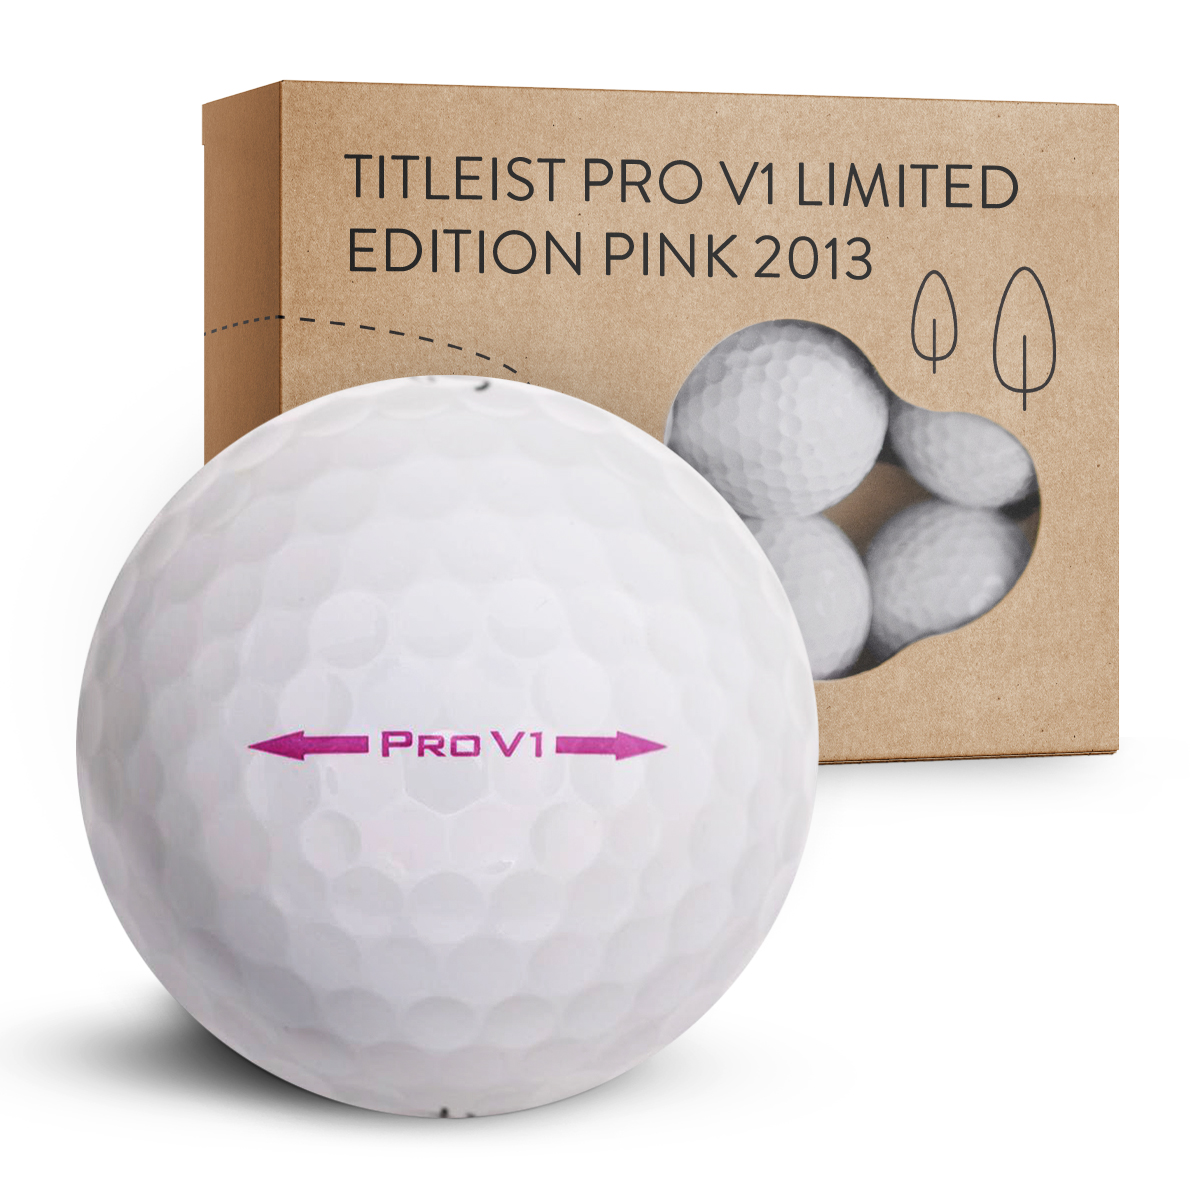 Titleist Pro V1 Limited Edition Pink